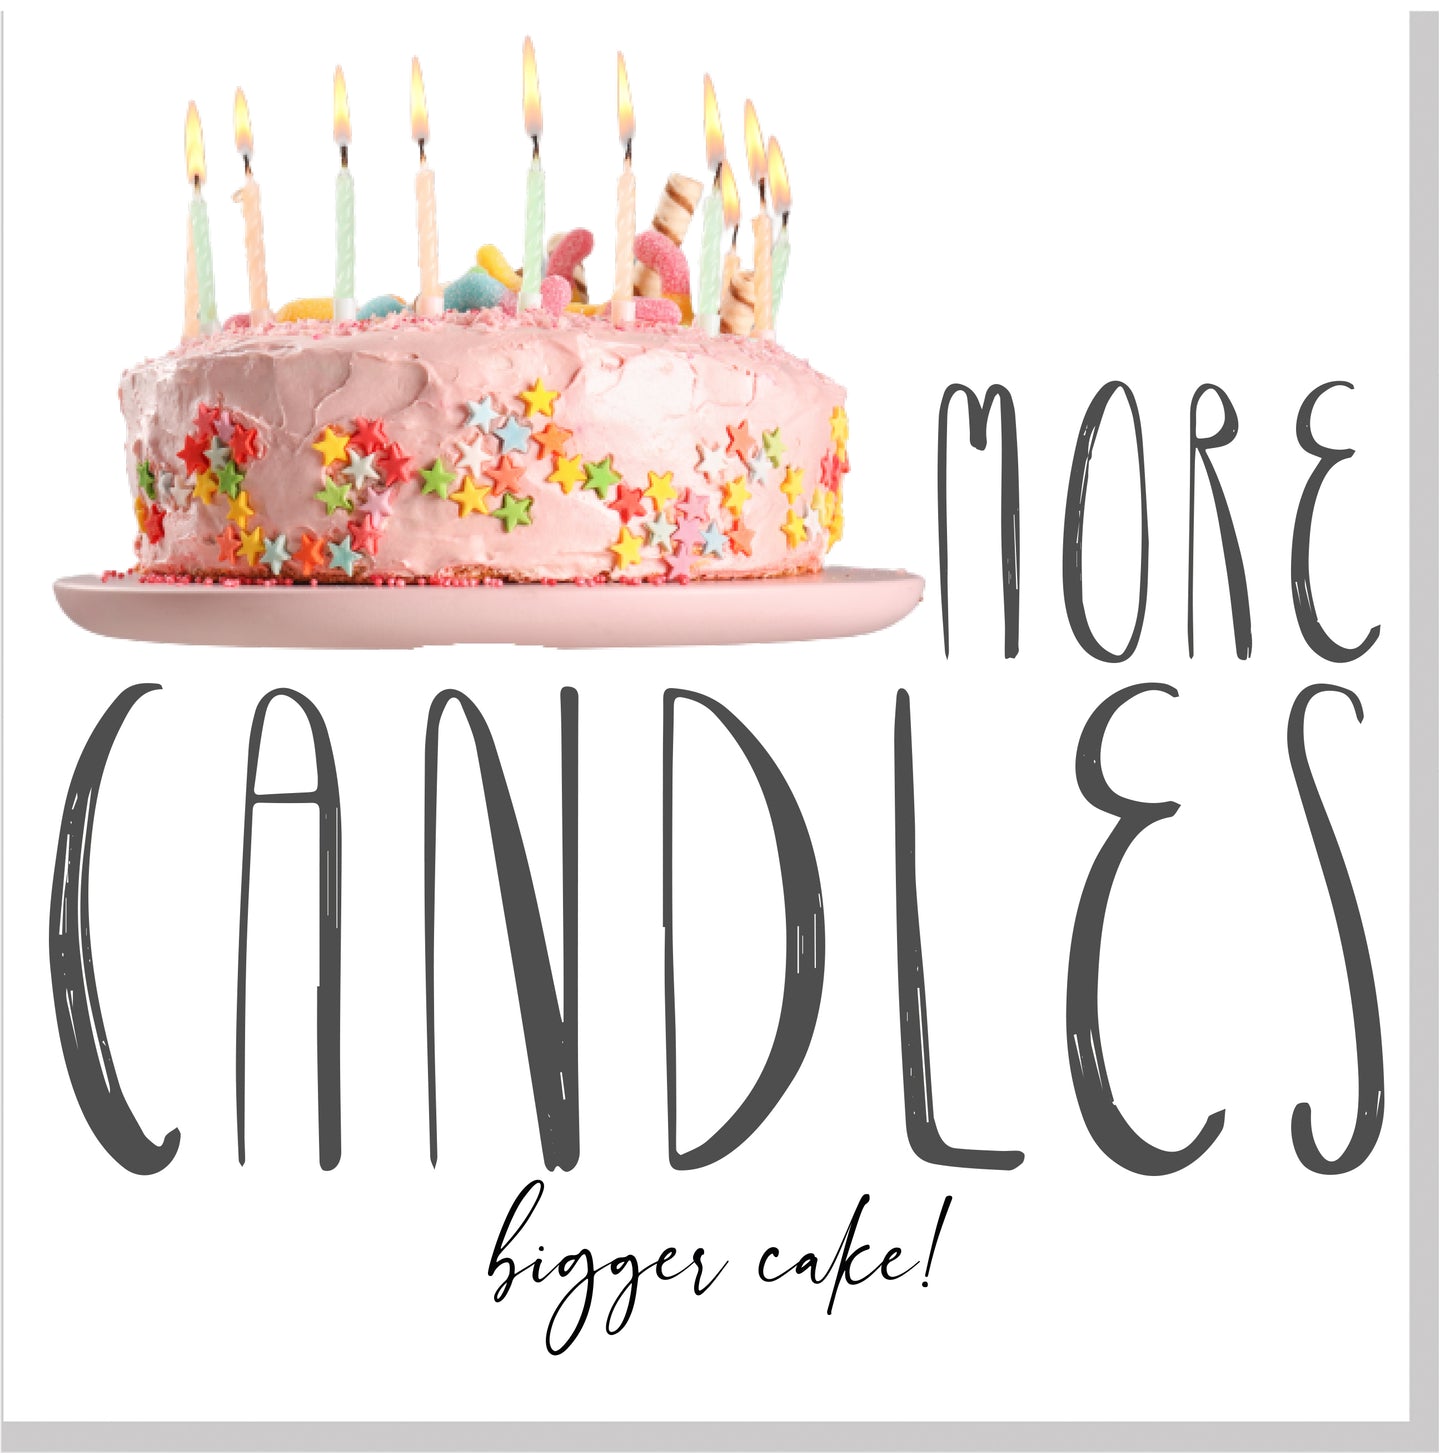 More Candles more cake square card